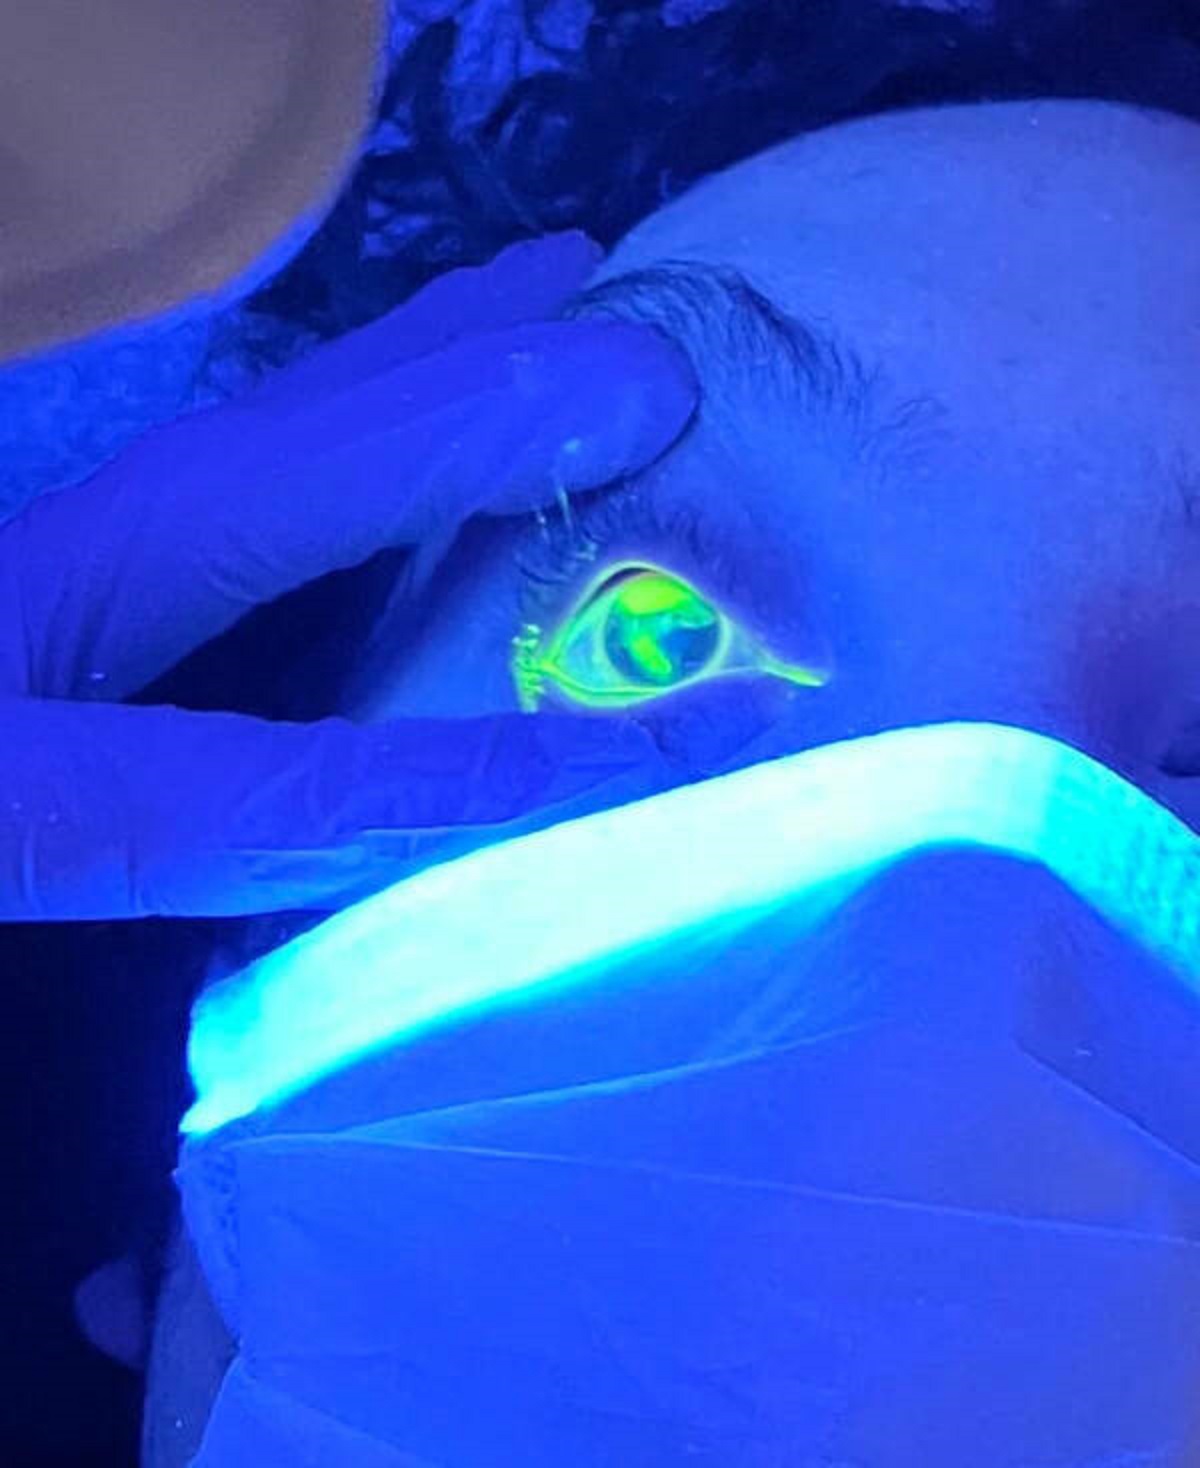 “Fluorescent eyedrops showing scratches on my cornea”